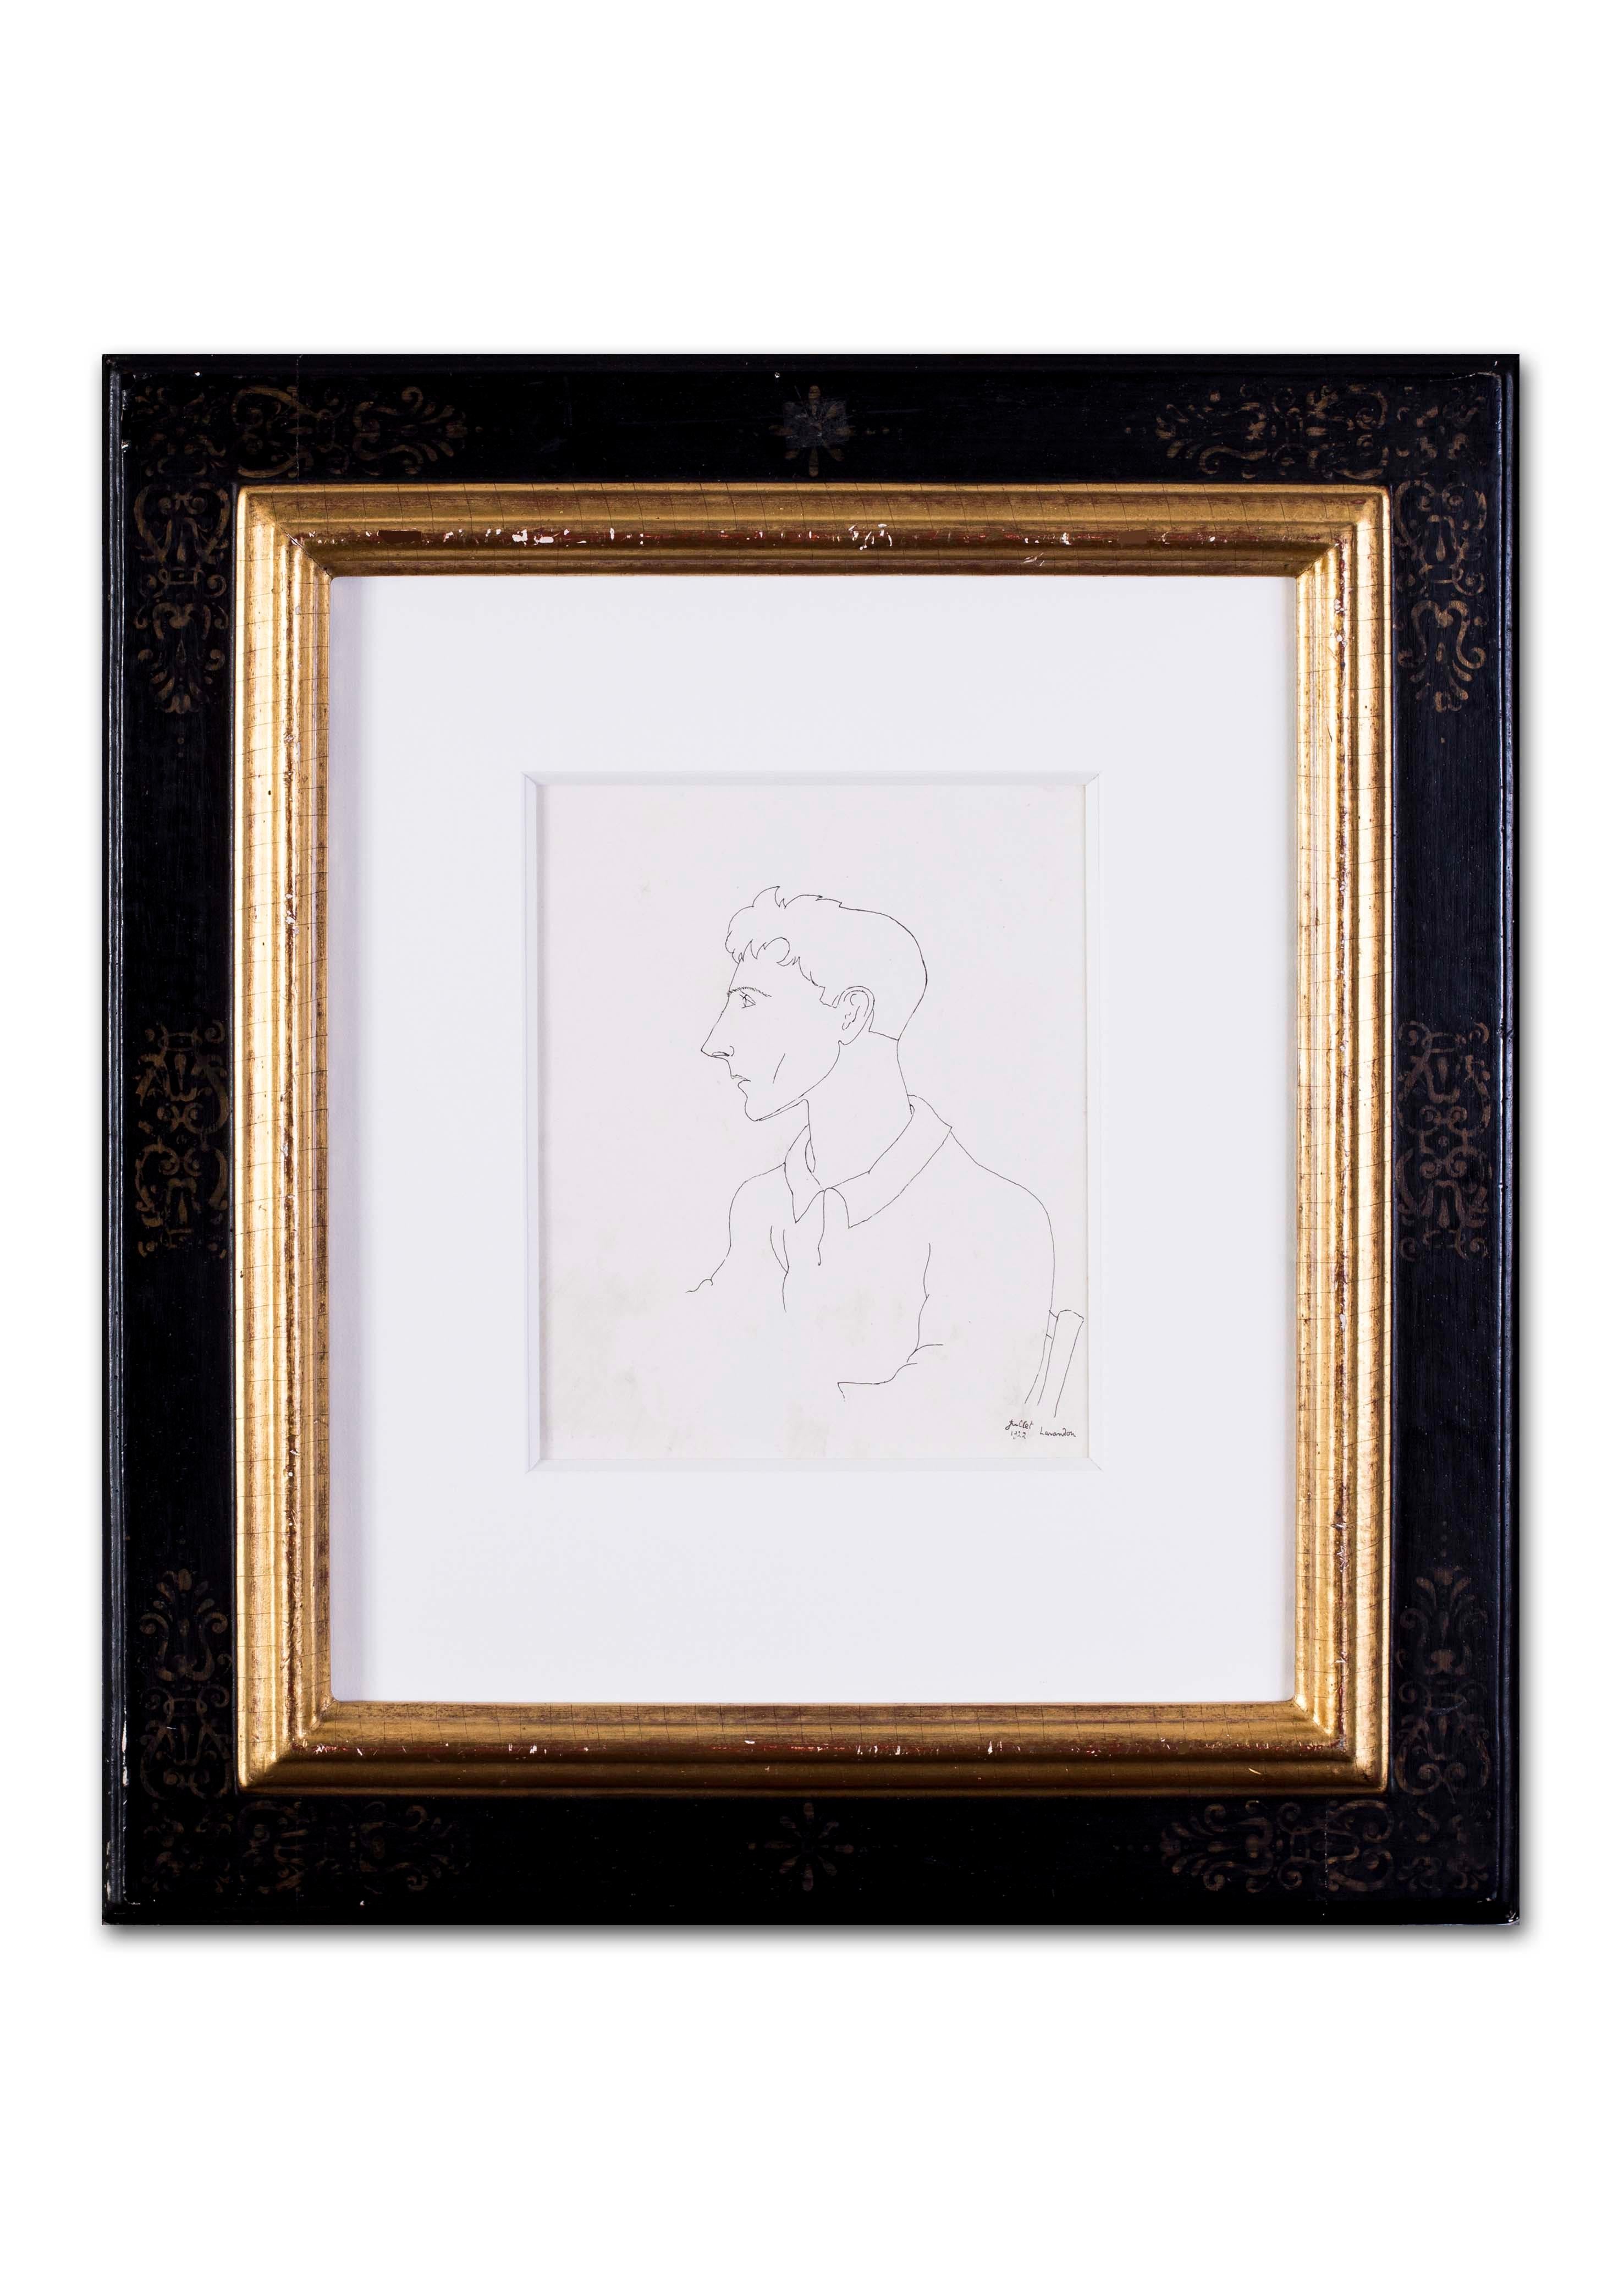 Early Jean Cocteau, Self Portrait, ink drawing, 1922 For Sale 4